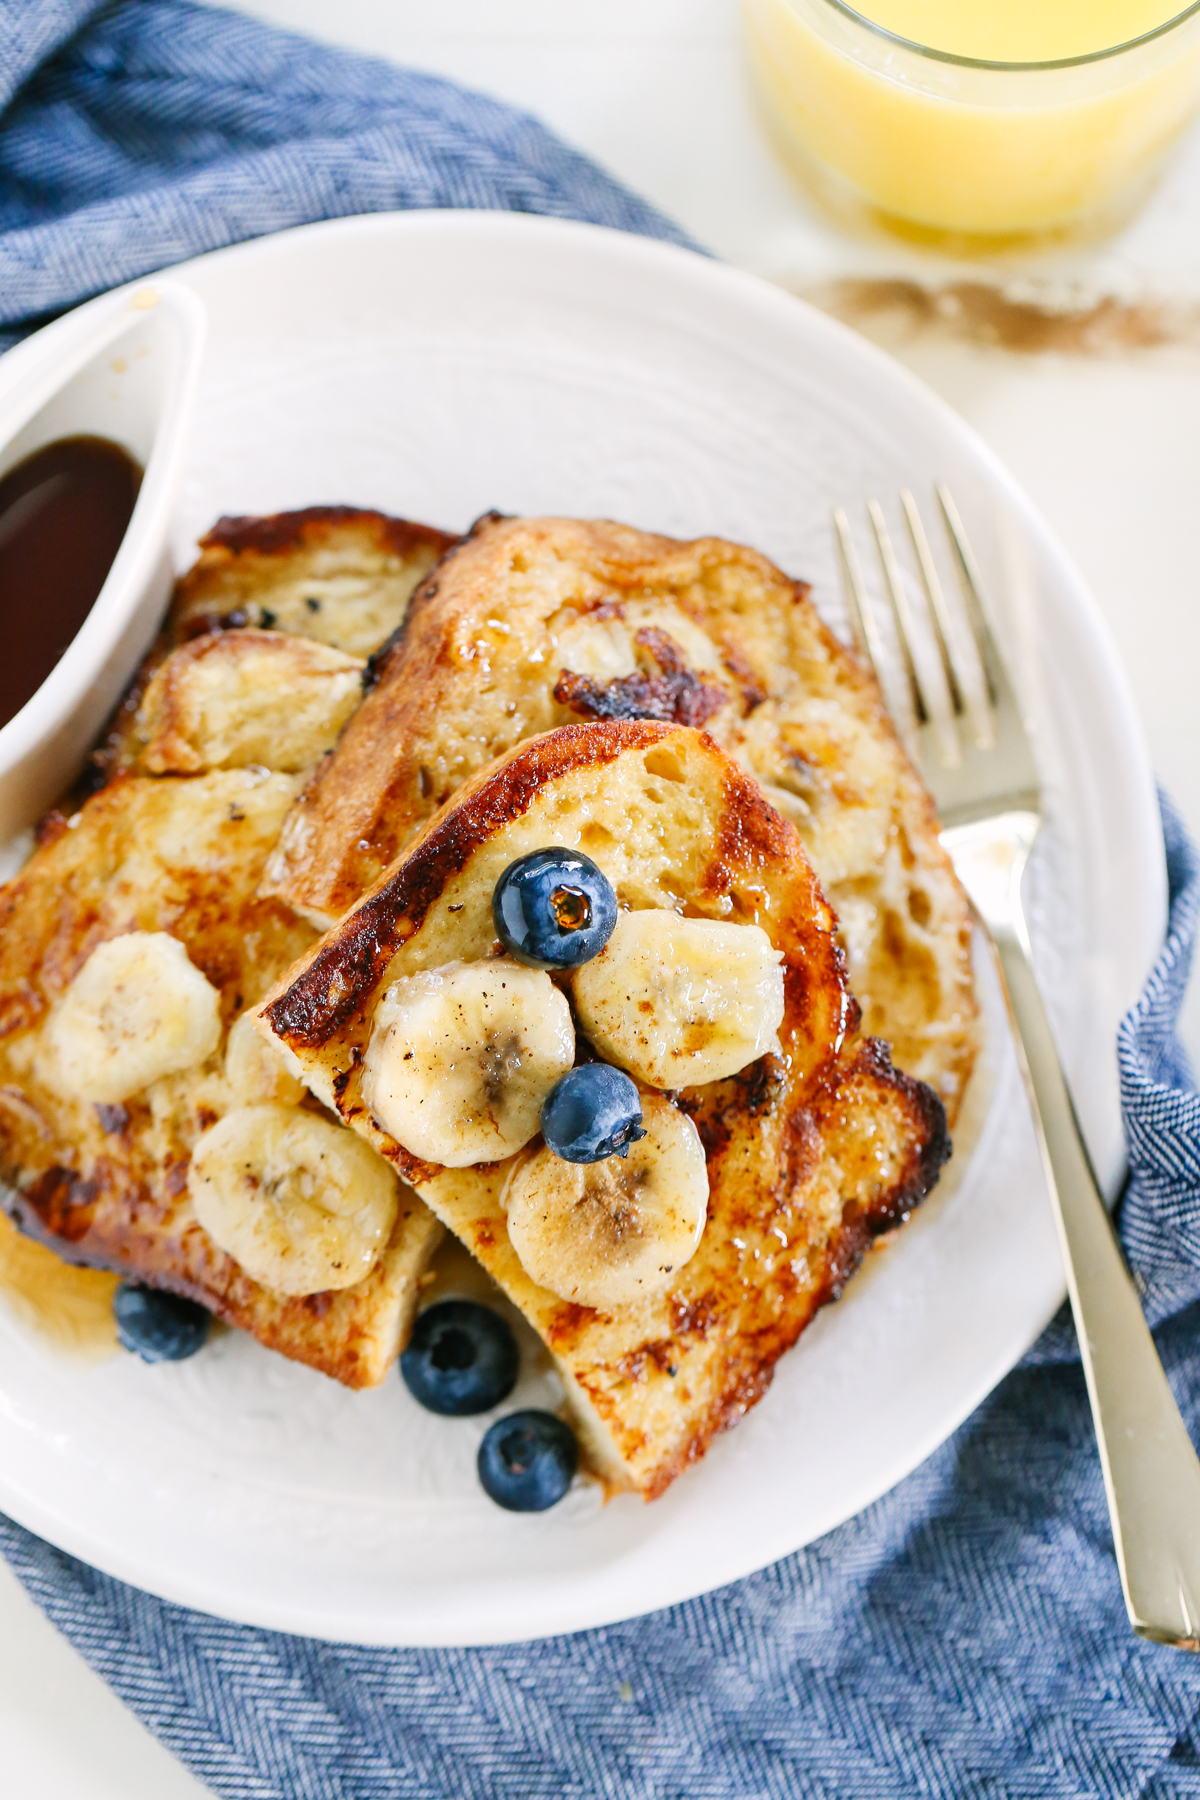 French toast slices on a white plate with blueberries and bananas on top.